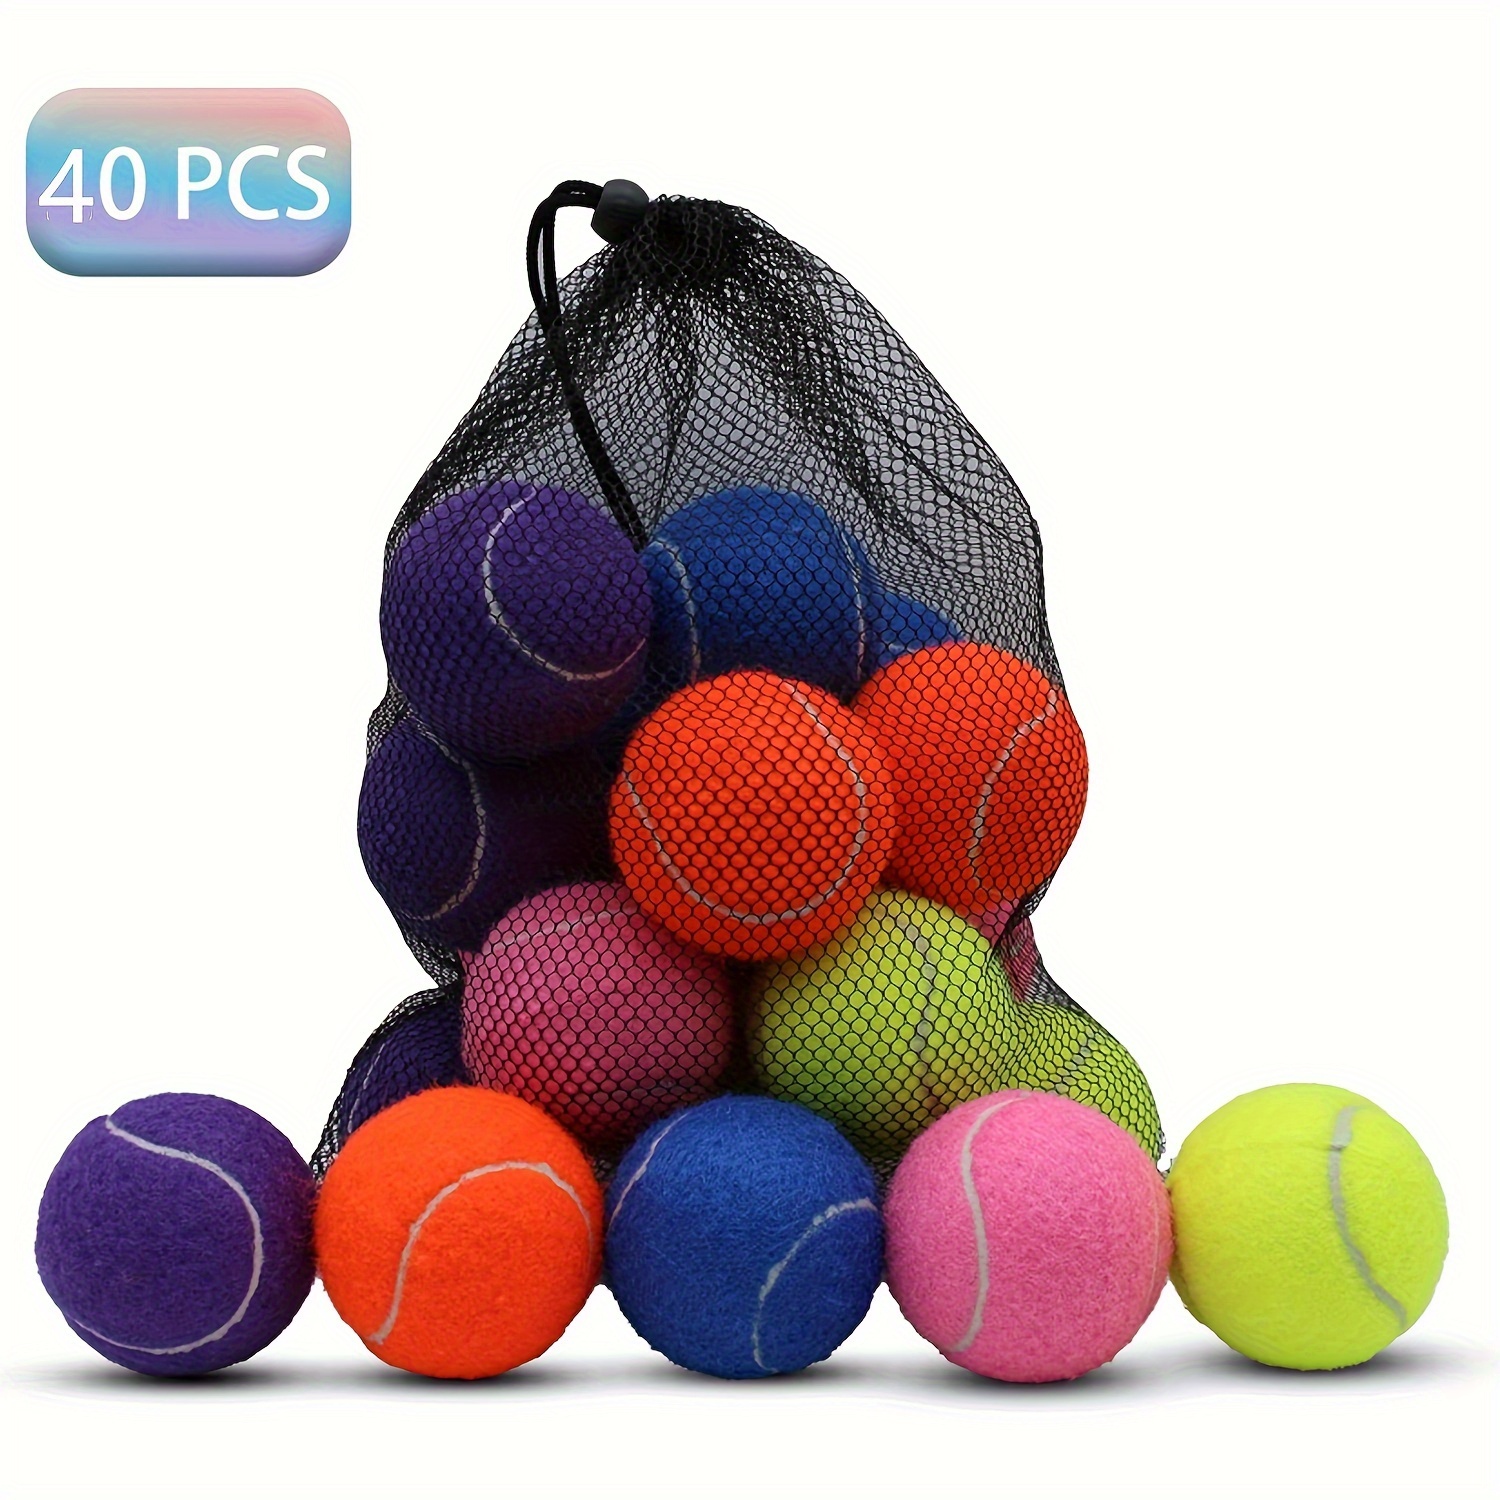 

Tennis Balls, 40 Pack Tennis Balls For Dogs, Pet Dog Playing Balls, Come With Mesh Bag For Easy Transport, Colorful Easy Catching Pet Dog Balls